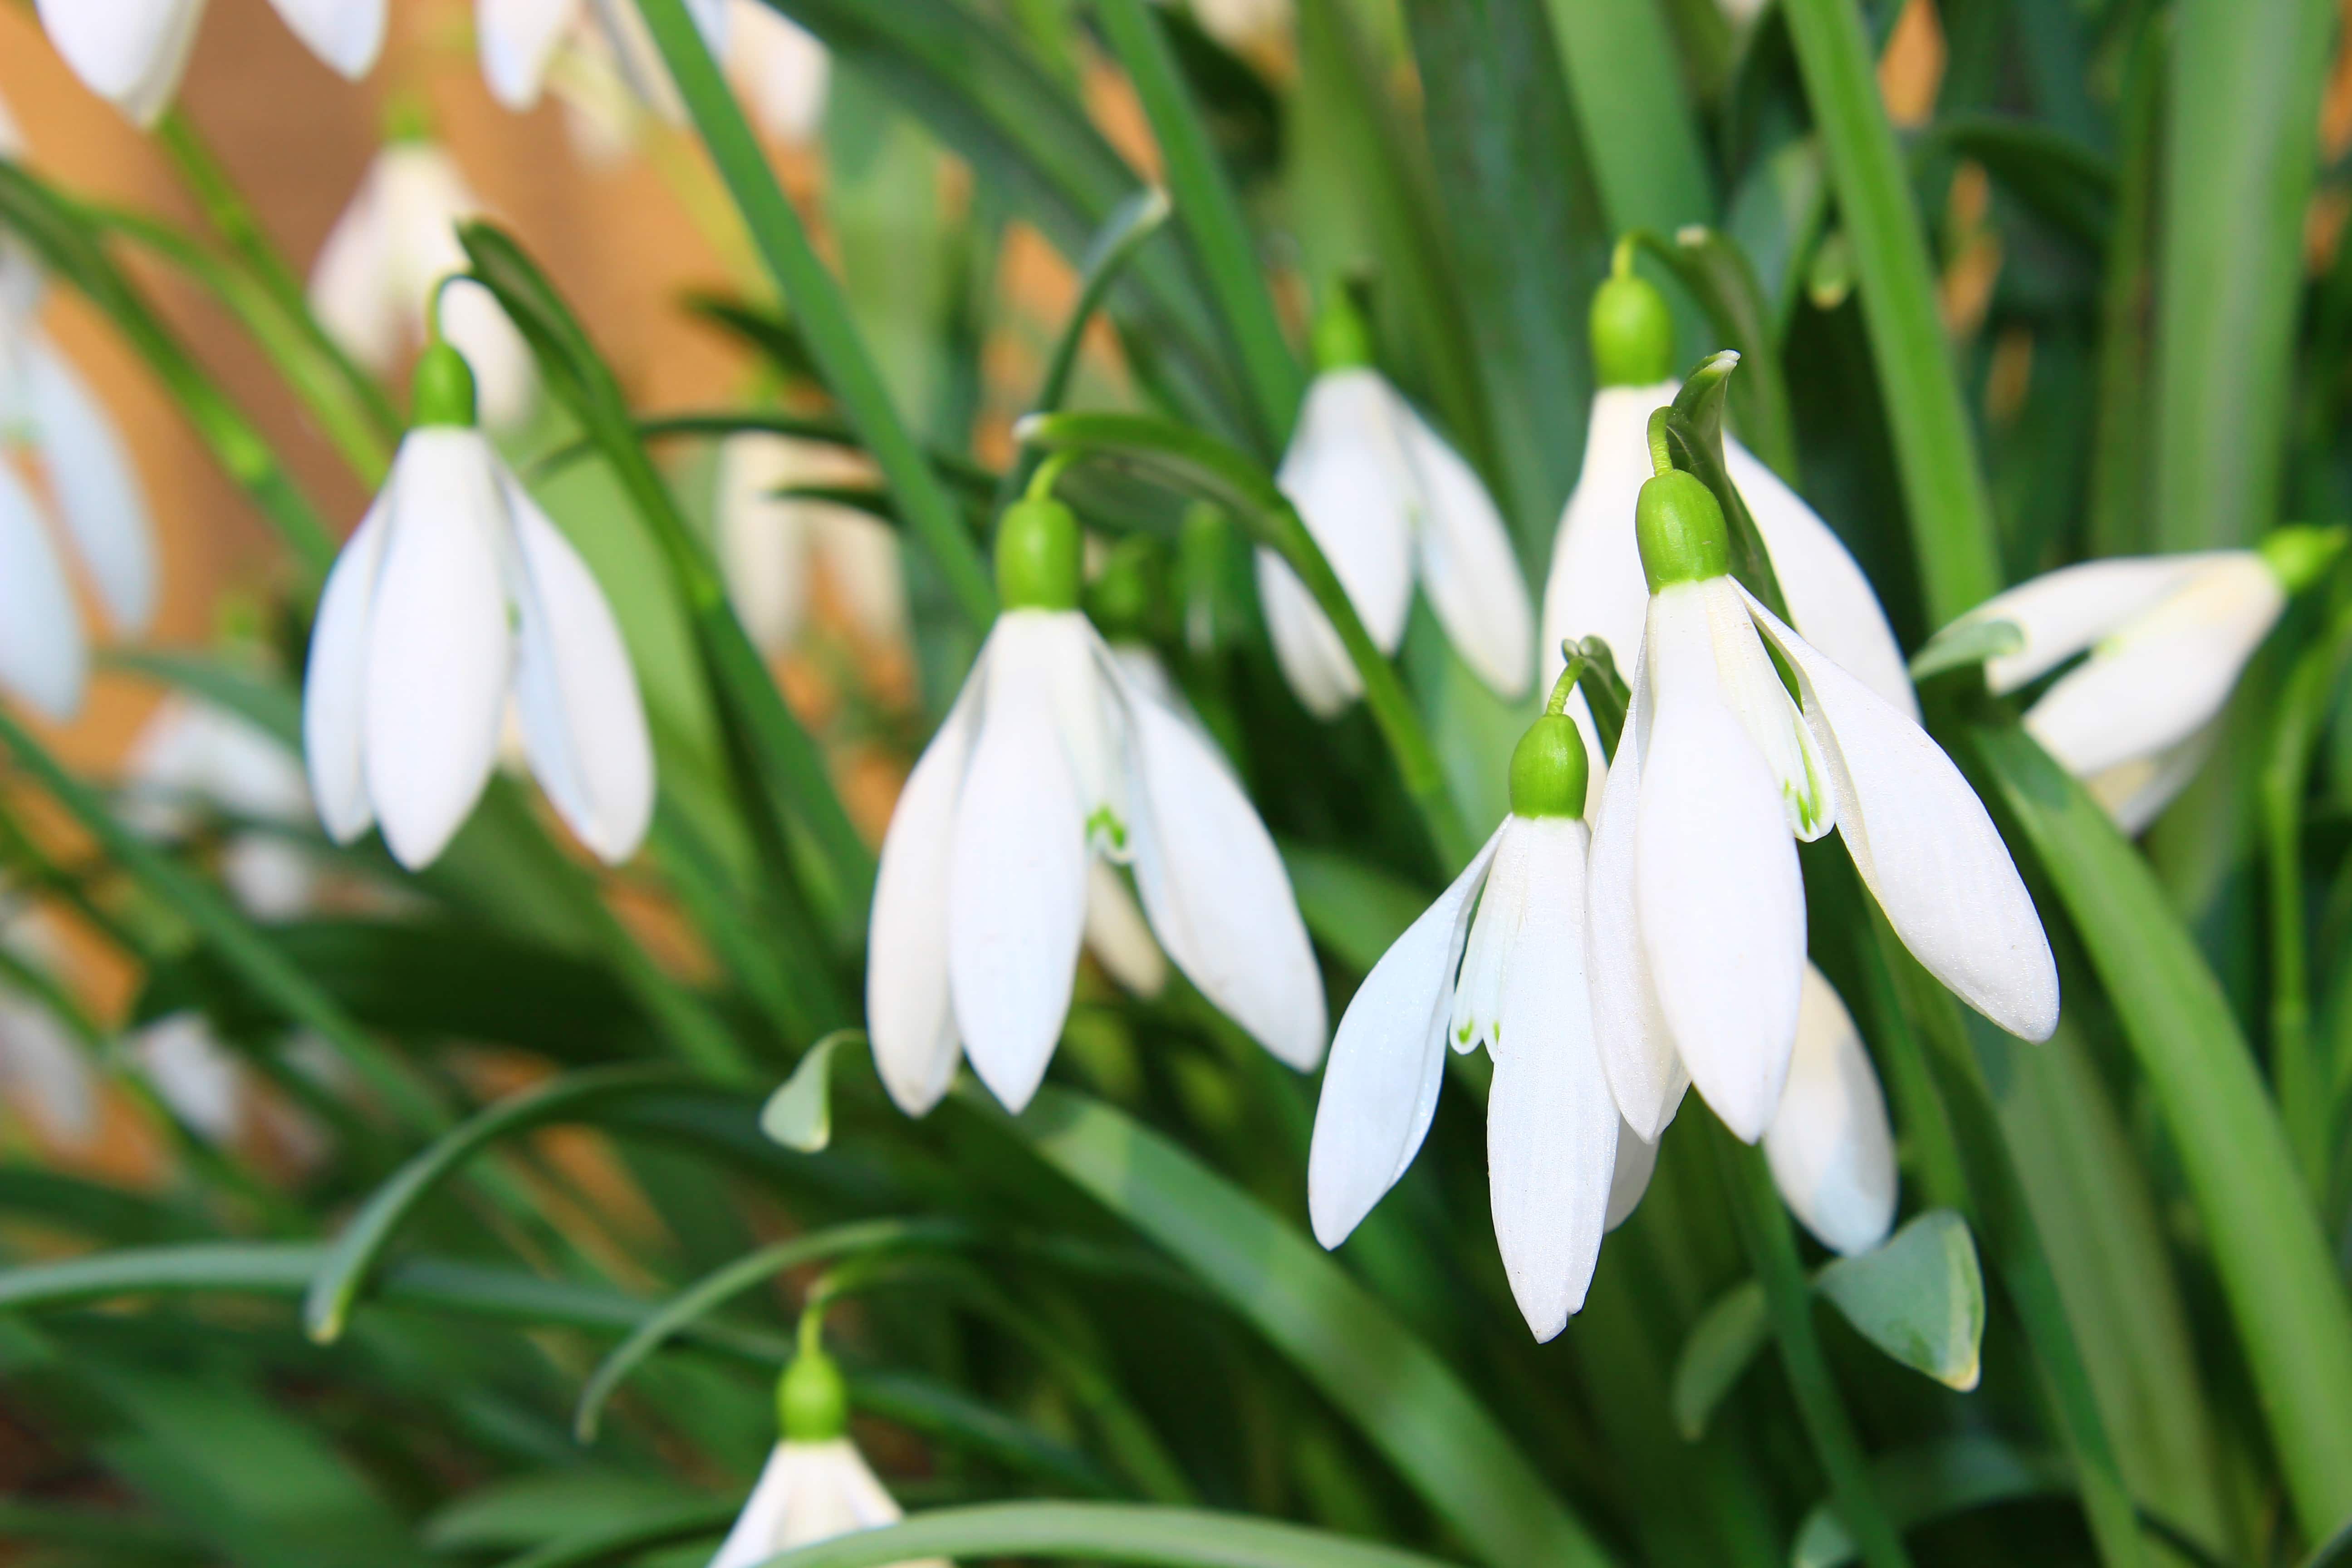 Some snowdrop species are threatened in their wild habitats, and in most countries it is now illegal to collect bulbs from the wild.